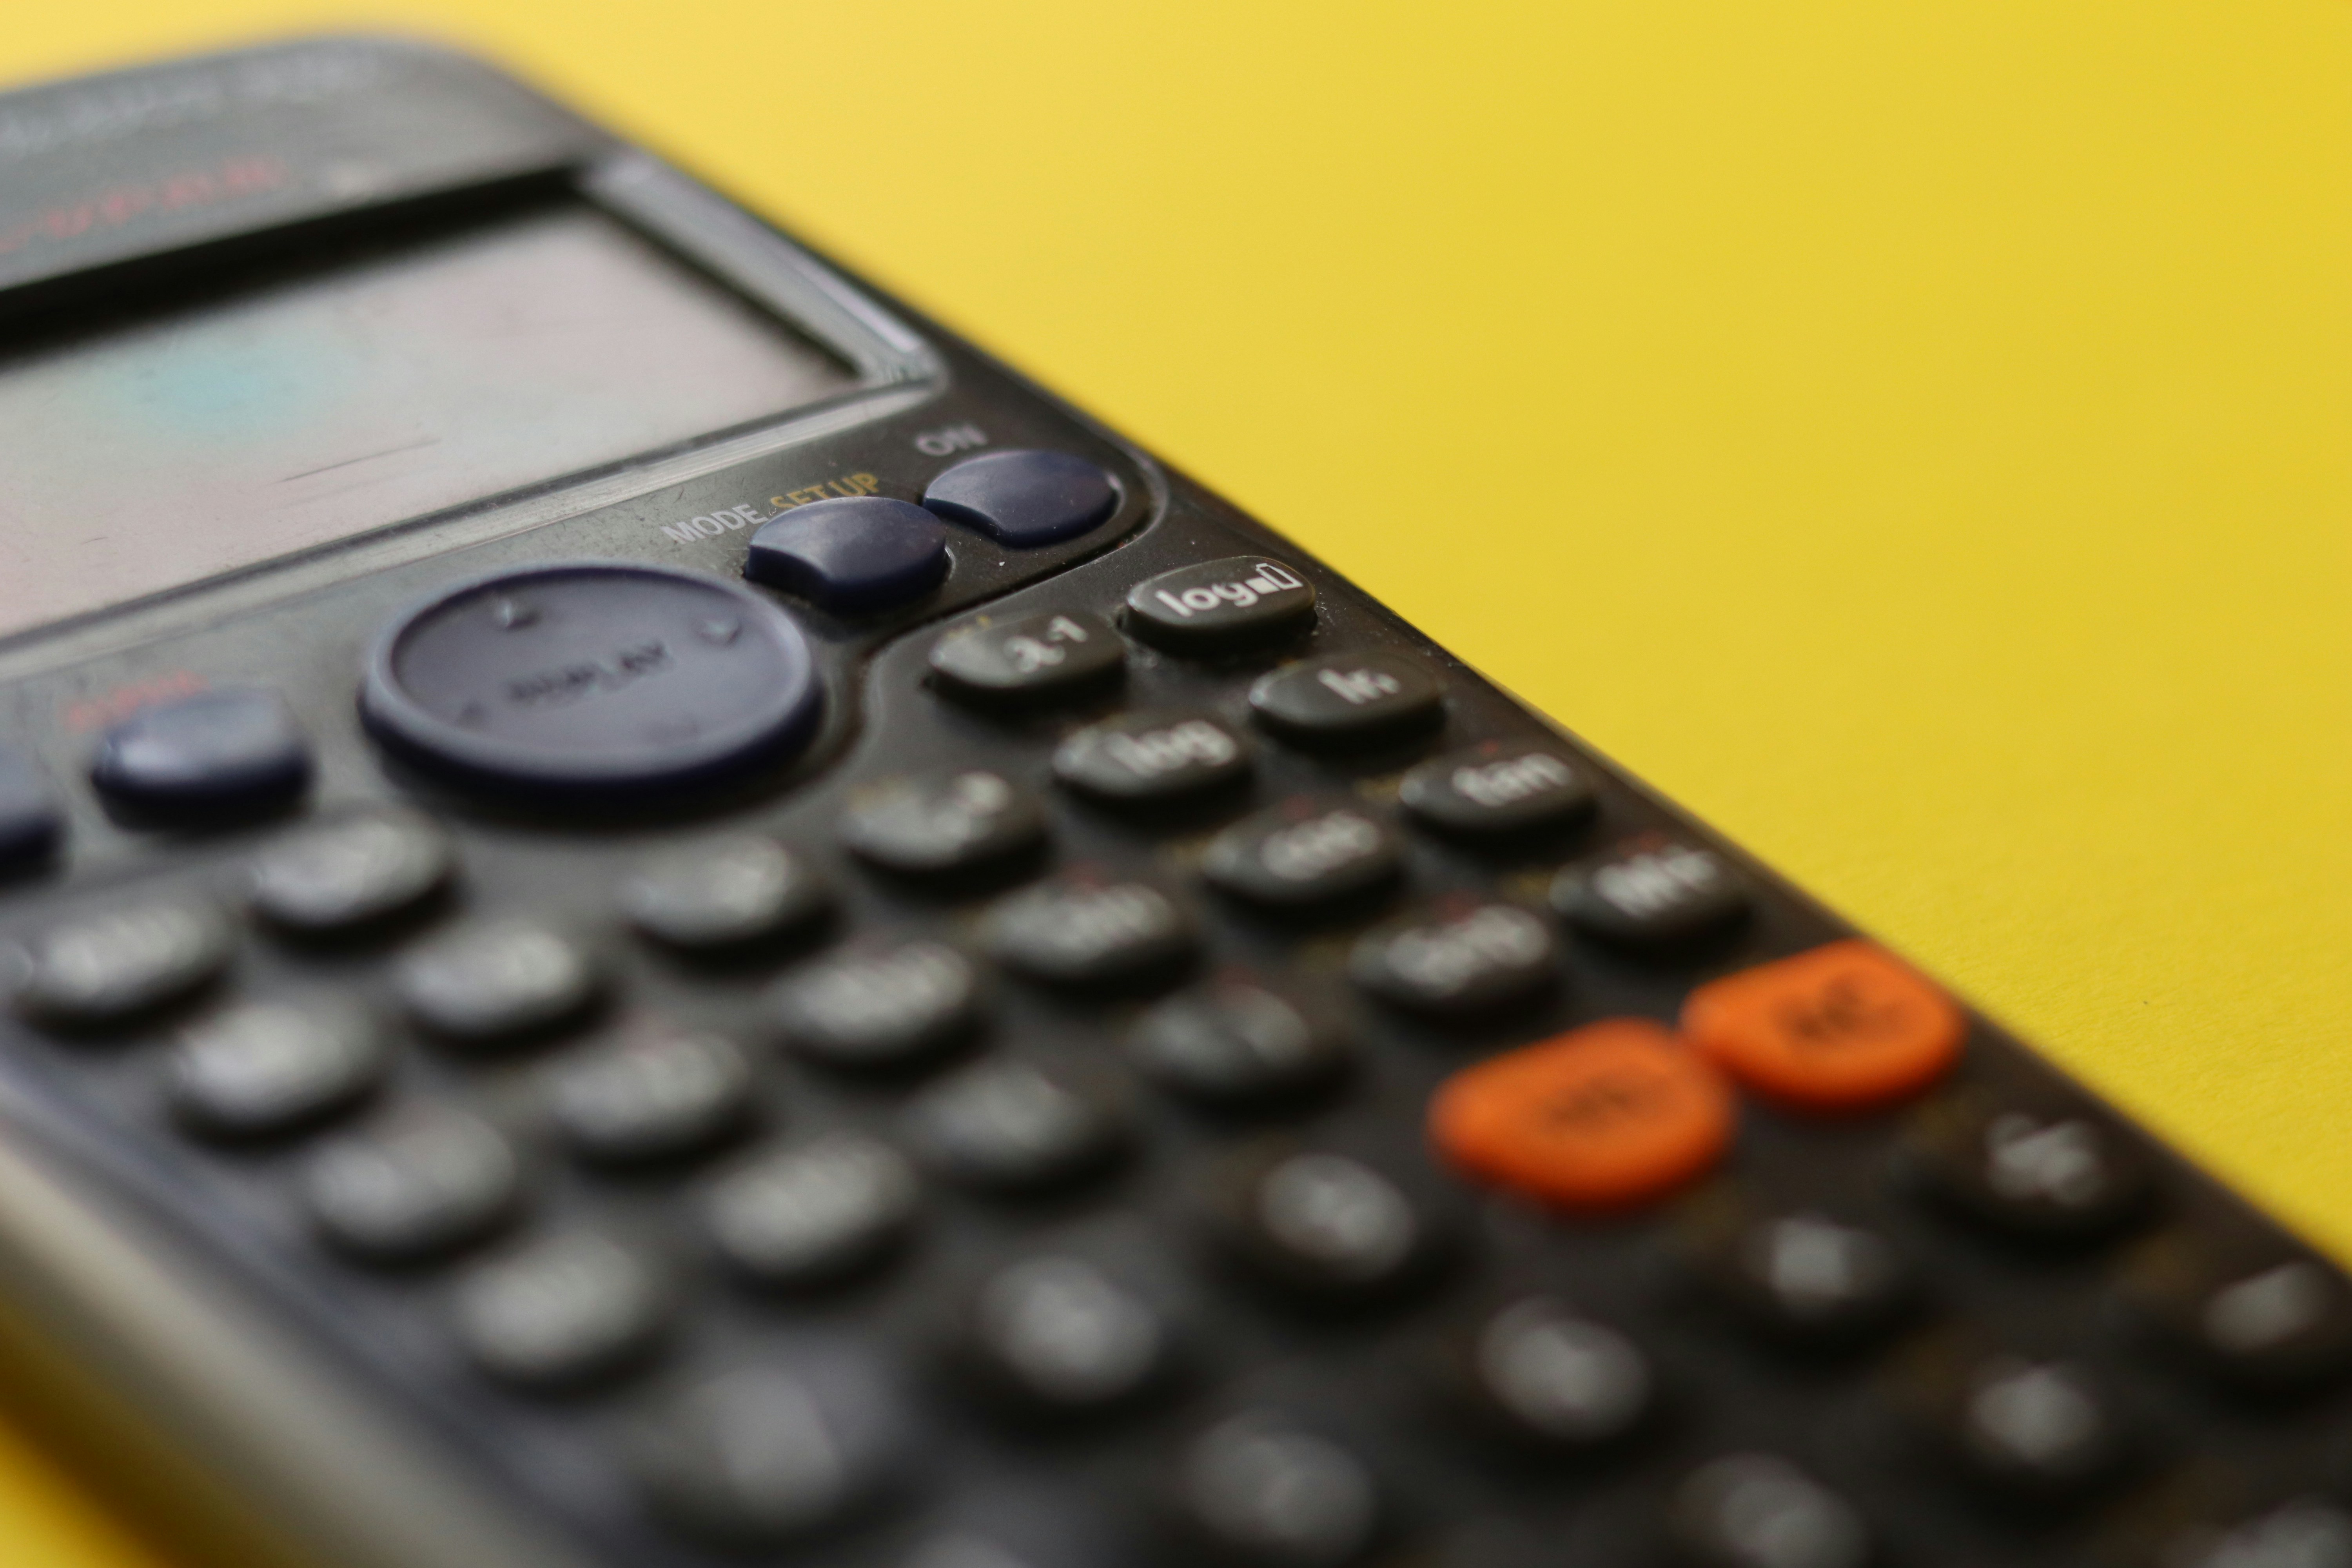 A calculator in a yellow background